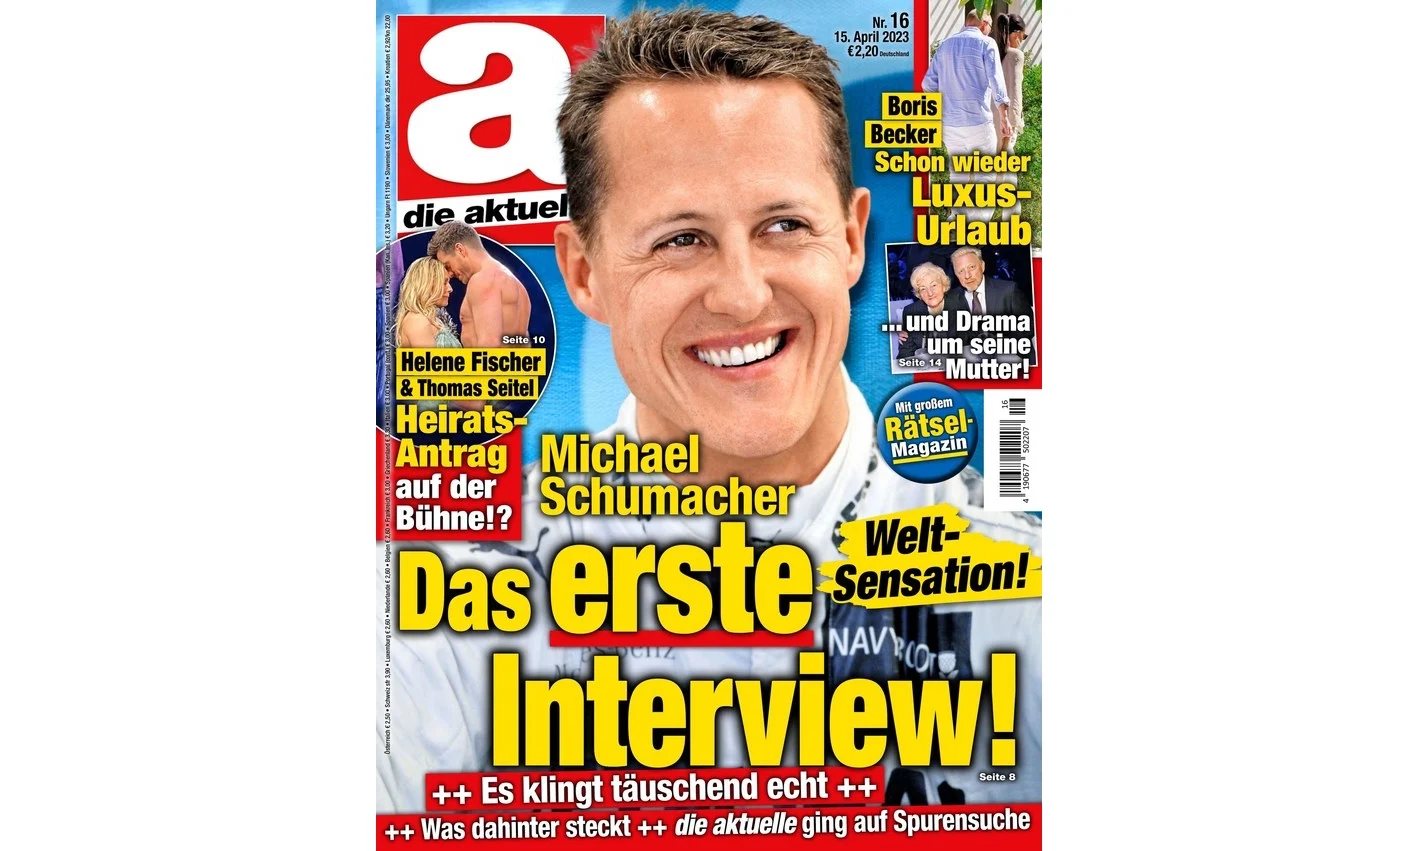 Cover of the April 15th, 2023 issue of German tabloid ‘Die Aktuelle’ featuring Michael Schumacher’s face. The headlines (in German) hype an alleged interview with the Formula One great.